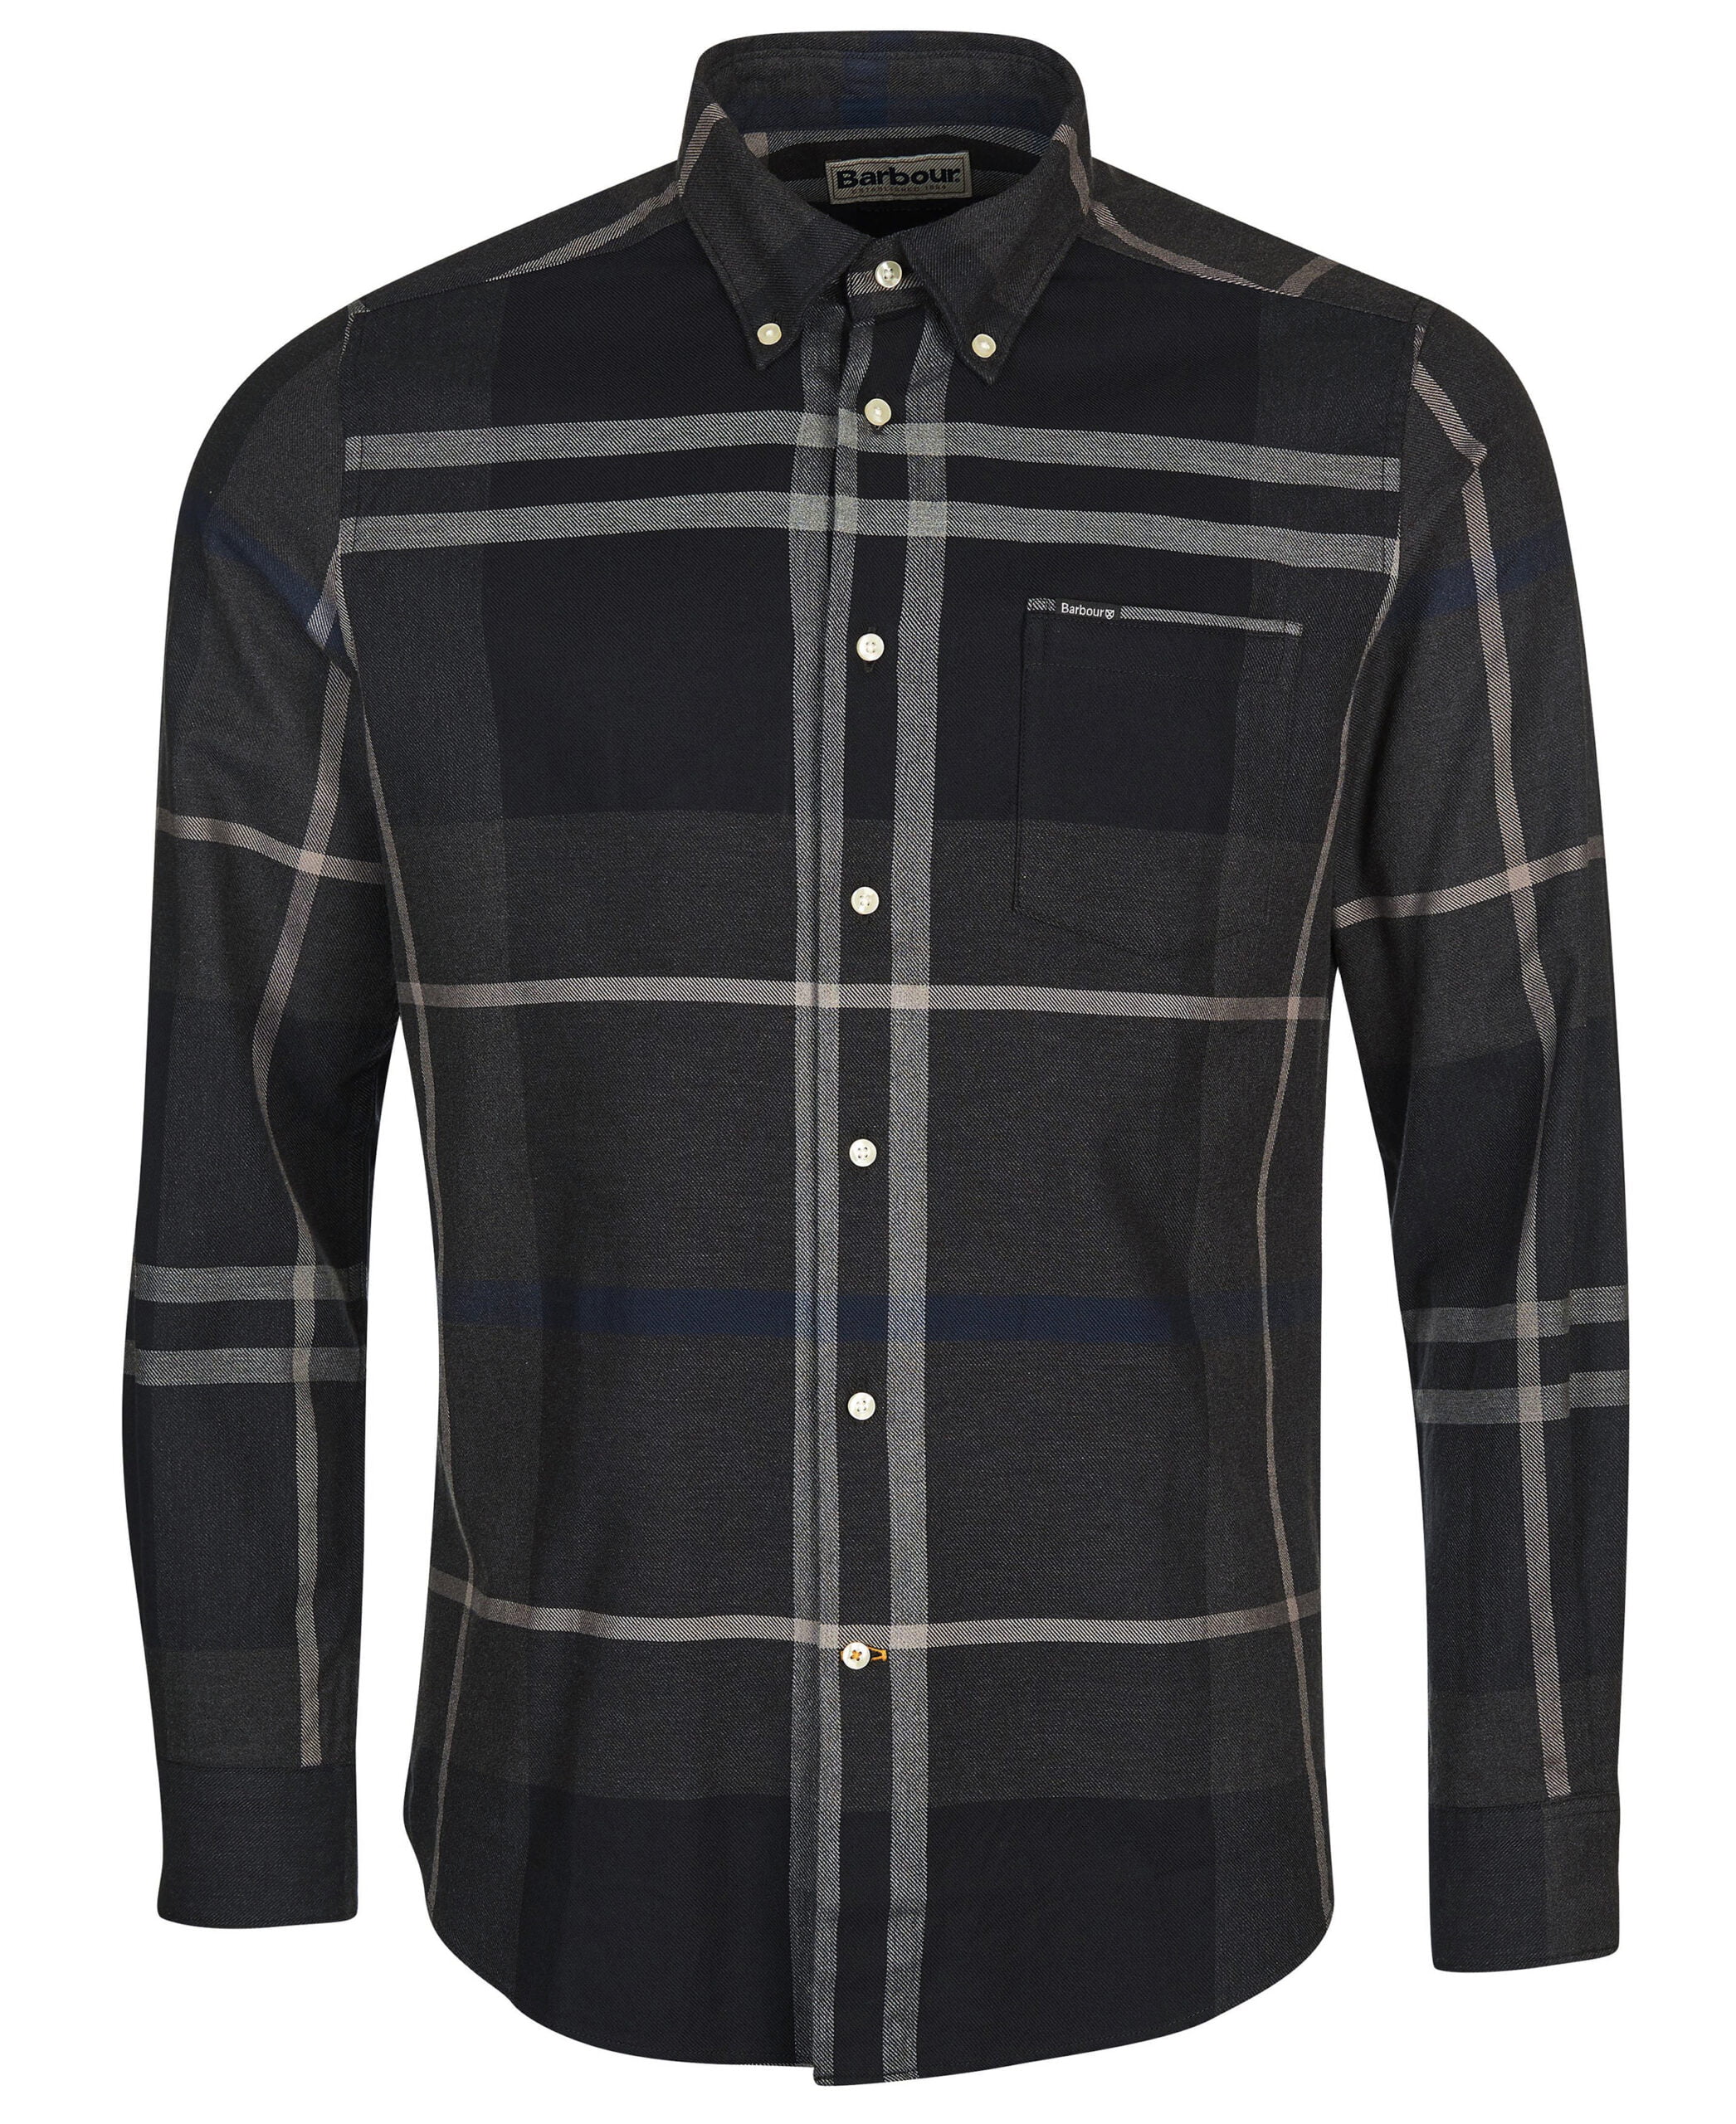 MSH4980GY38_02flatmen's_barbour_dunoon_shirt_graphite